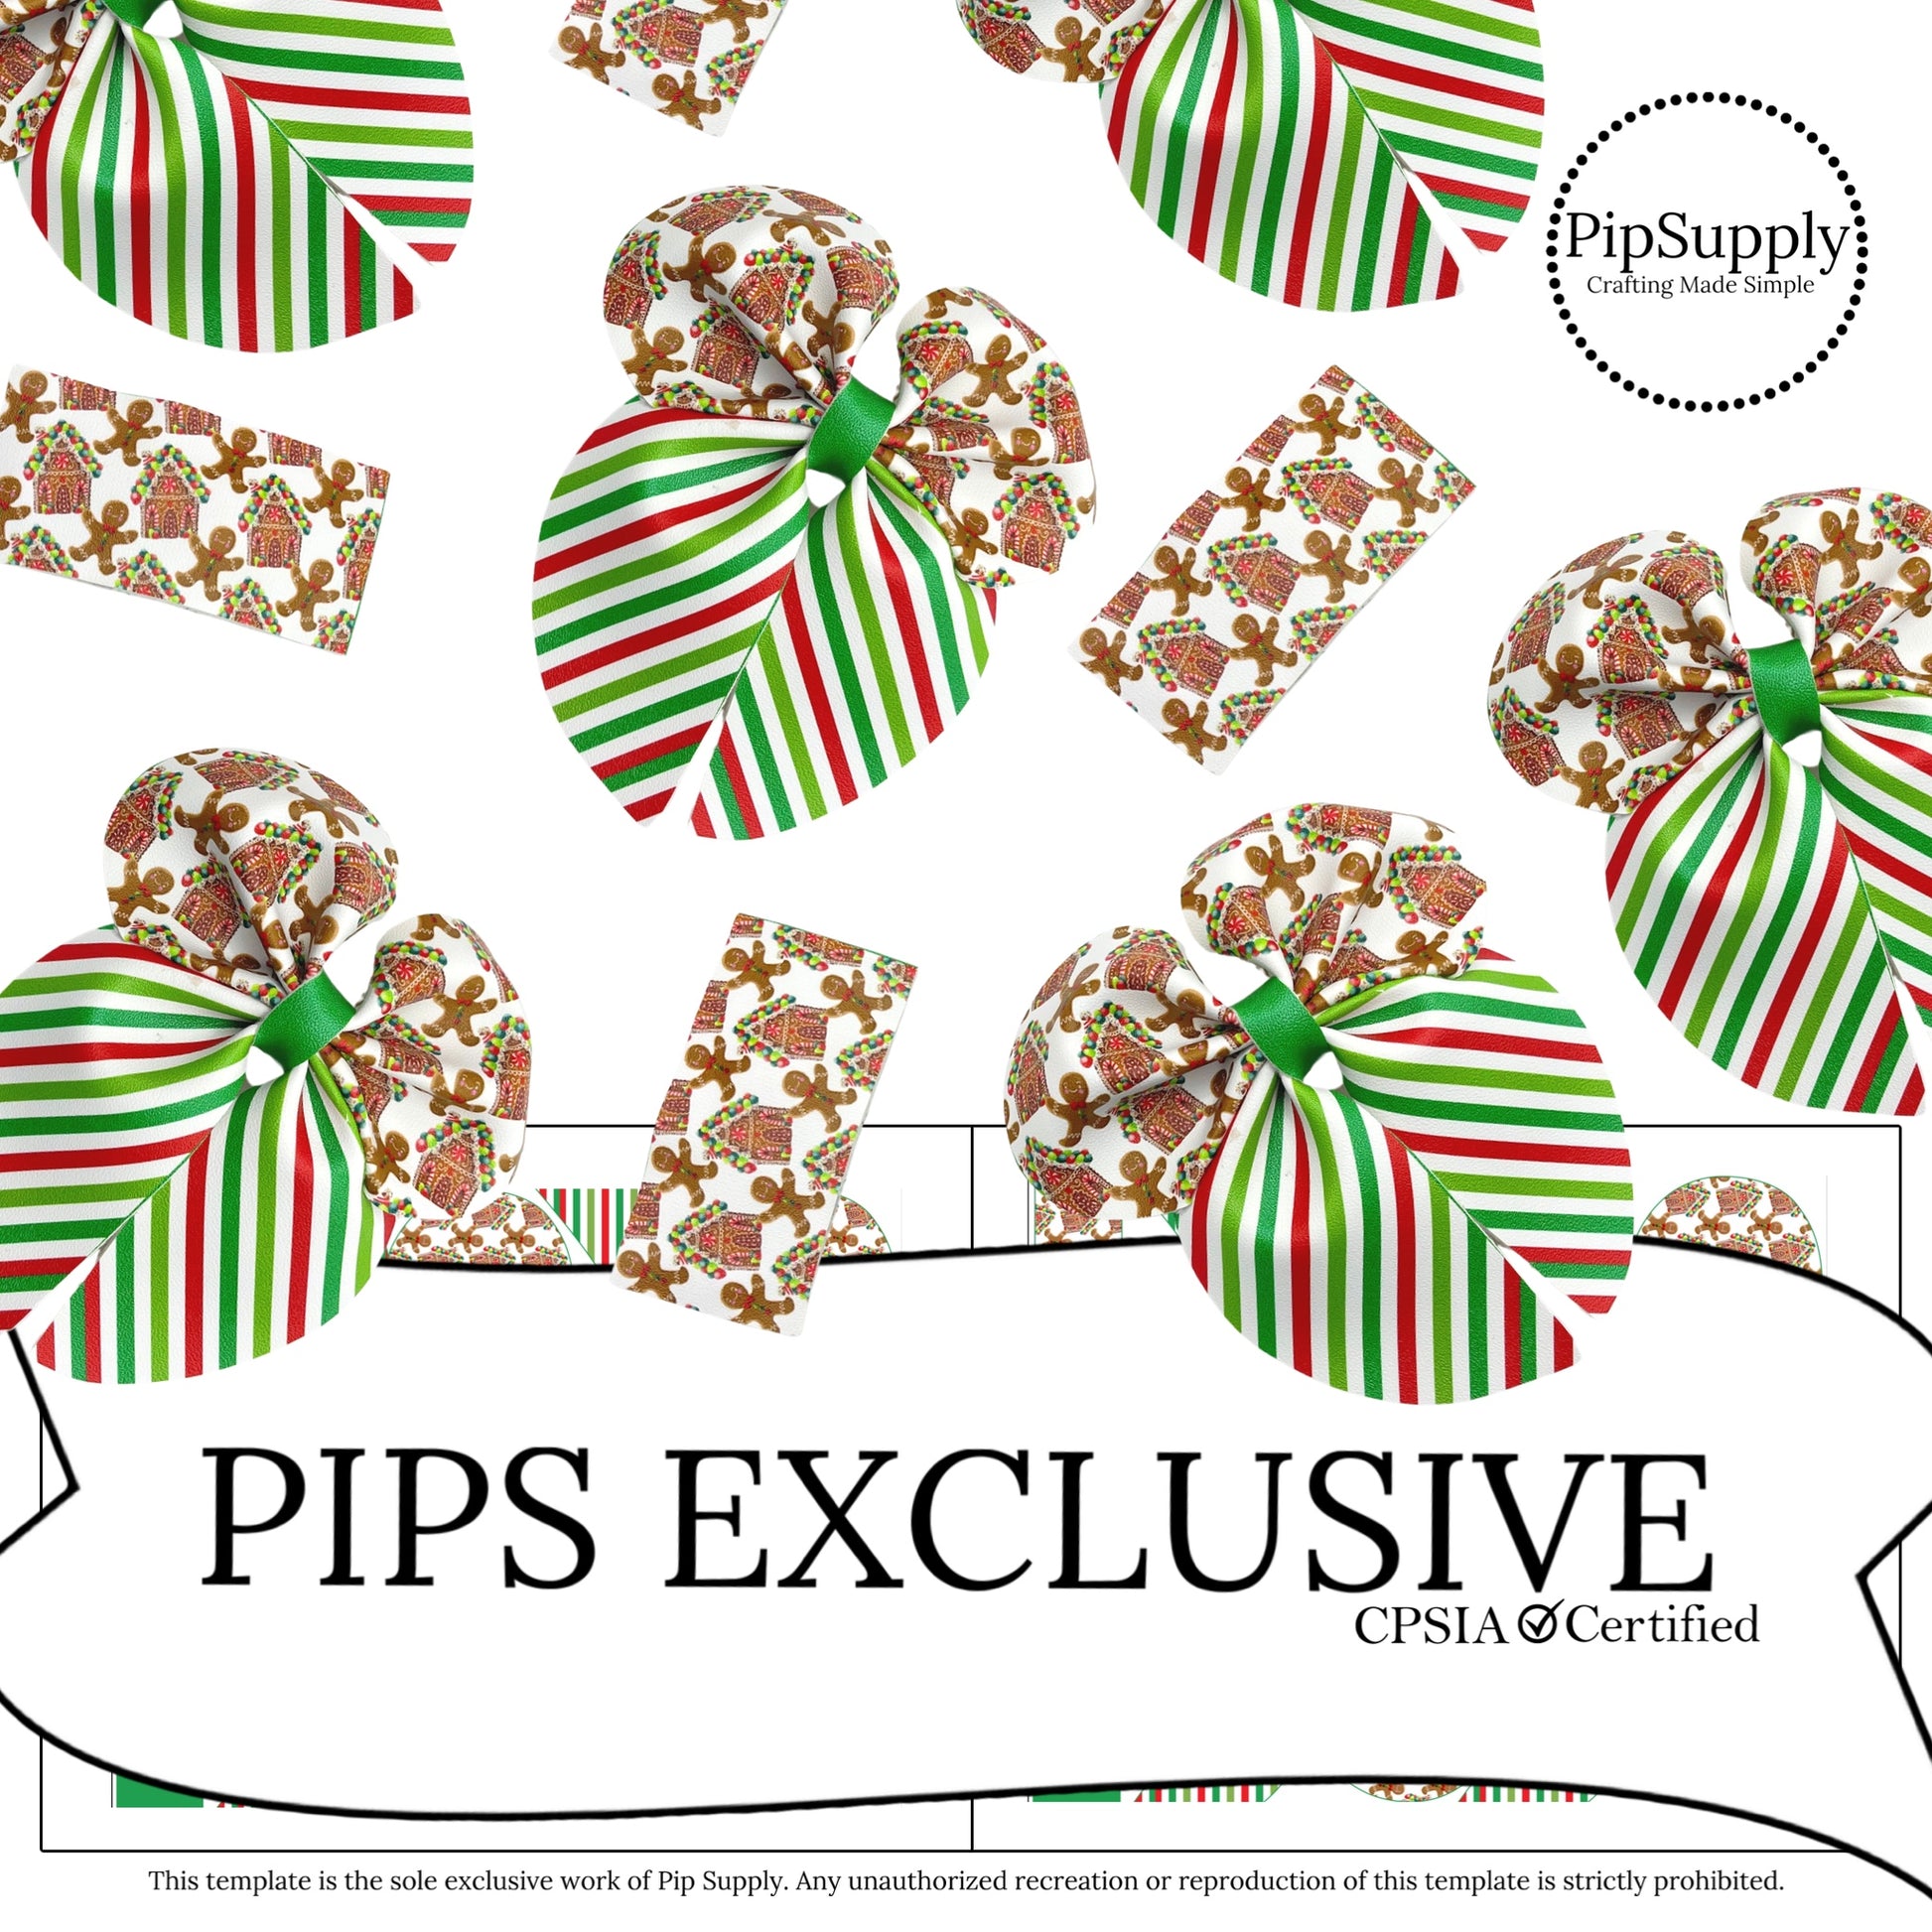 Red and green stripes with gingerbread man and houses bubble sailor bows